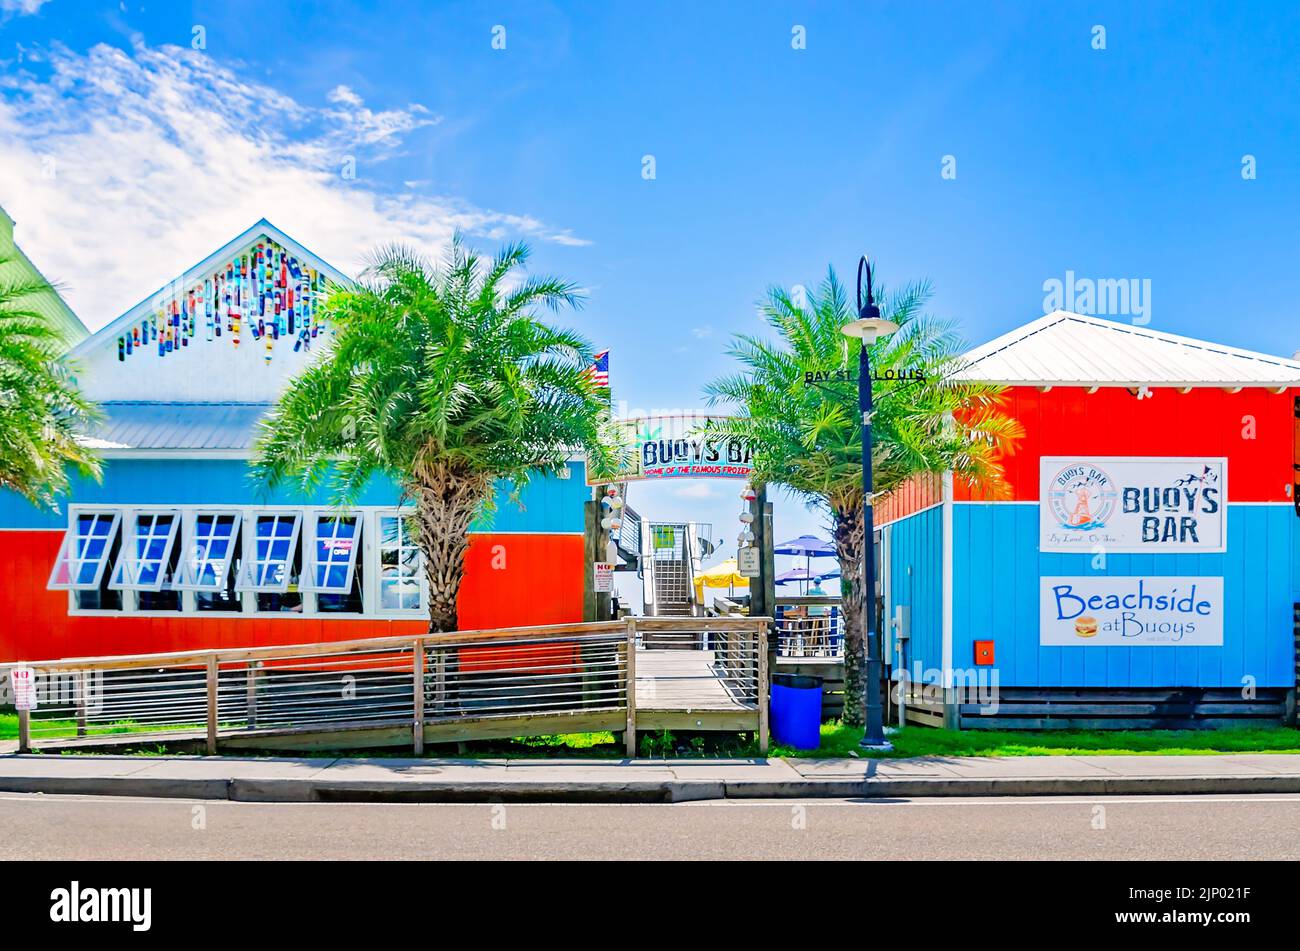 Buoys Bar is pictured, Aug. 13, 2022, in Bay Saint Louis, Mississippi. The coastal city was heavily impacted by Hurricane Katrina in 2005. Stock Photo